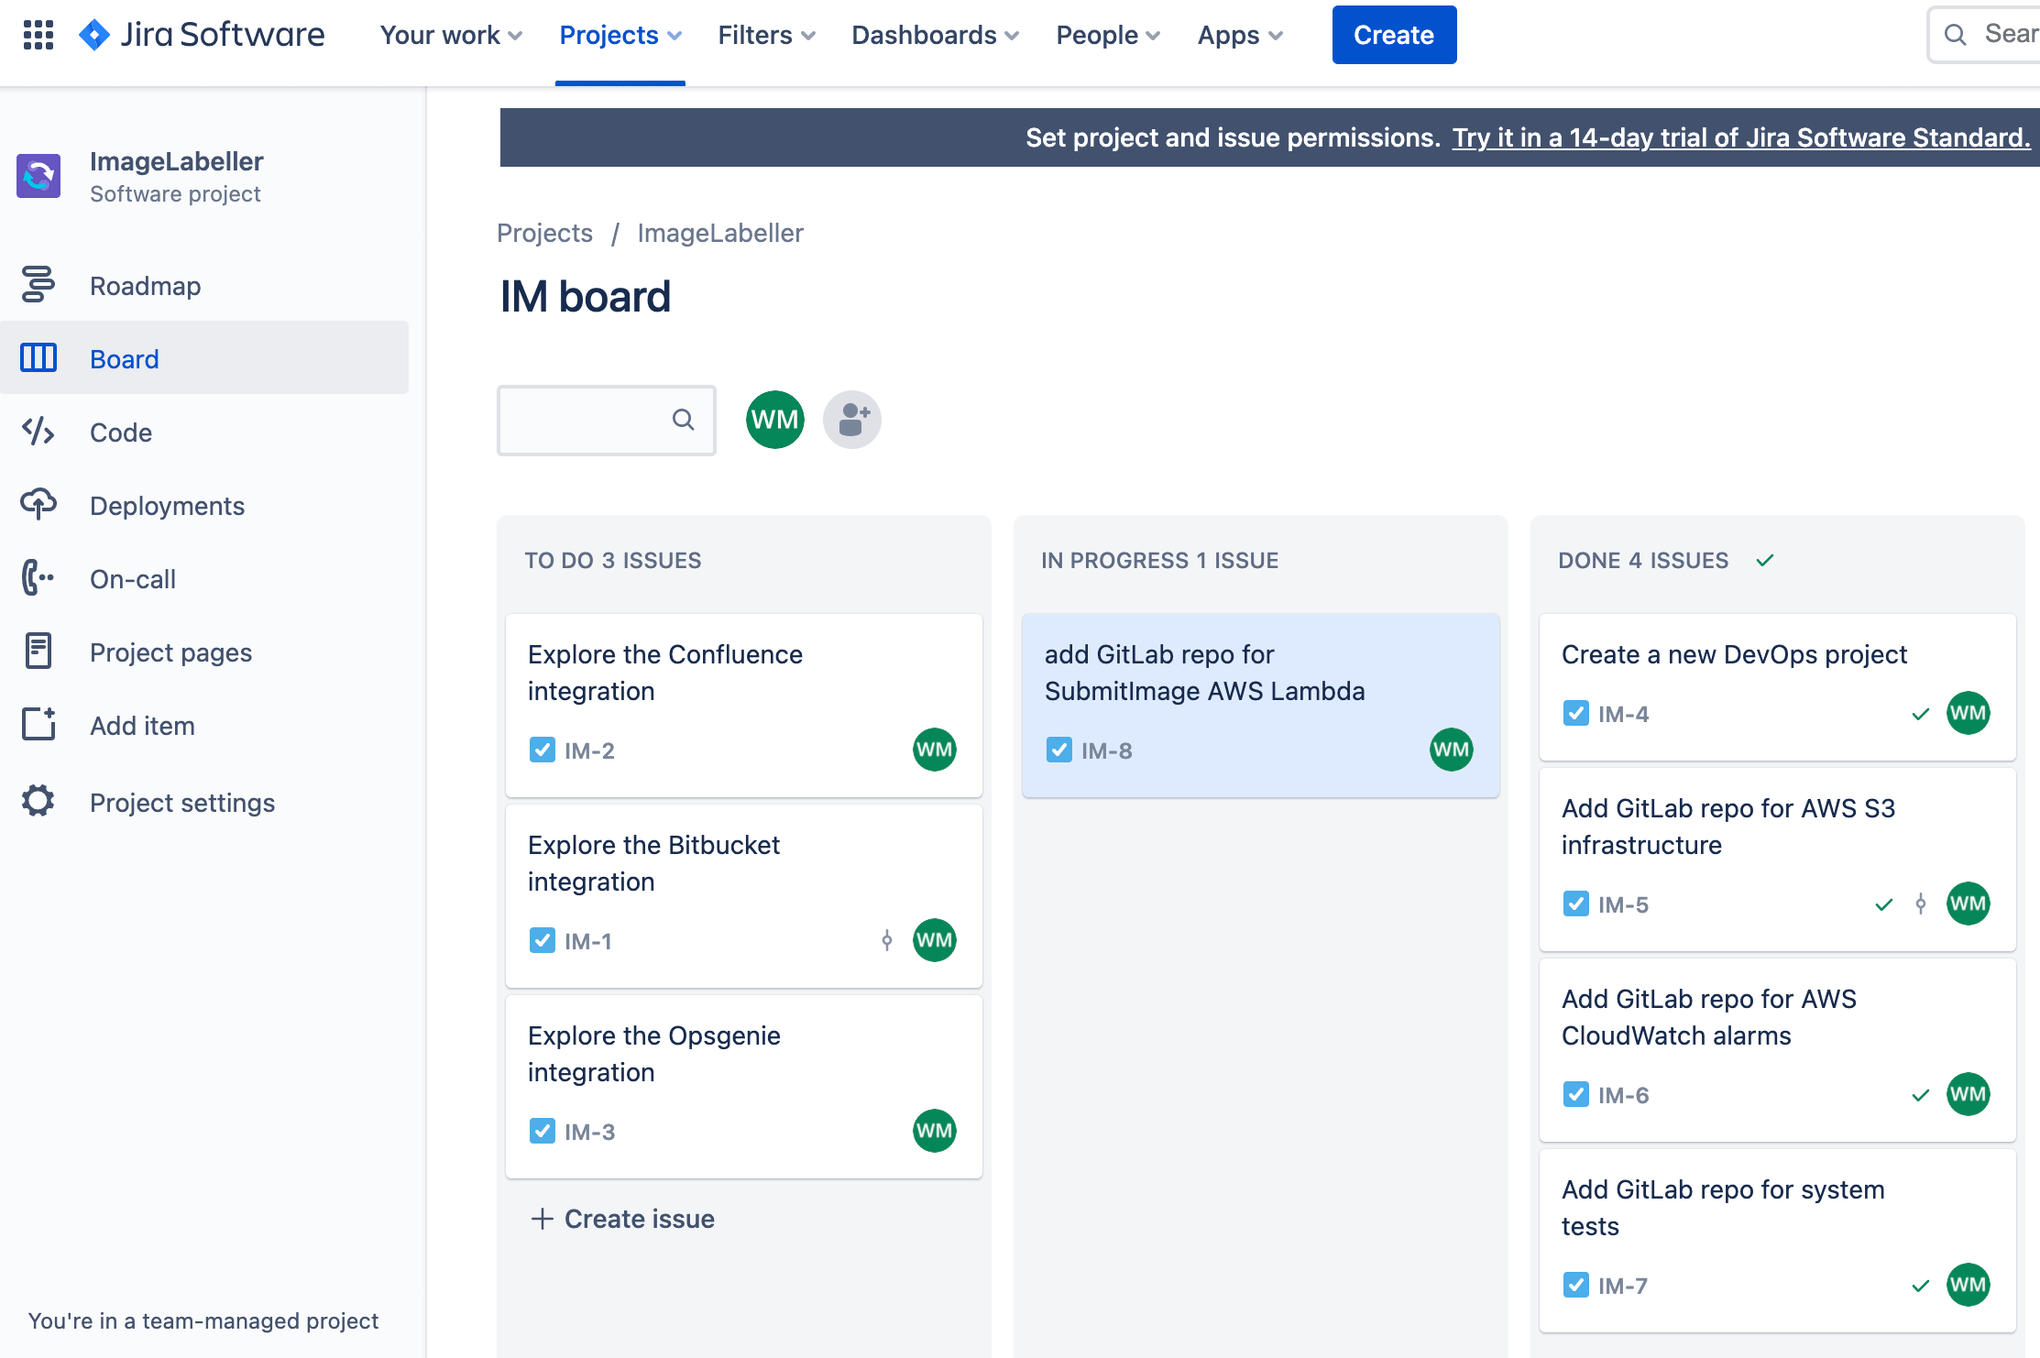 Imagelabeller board in Jira software - highlighting issue "IM-8 add GitLab repo for SubmitImage AWS Lambda"